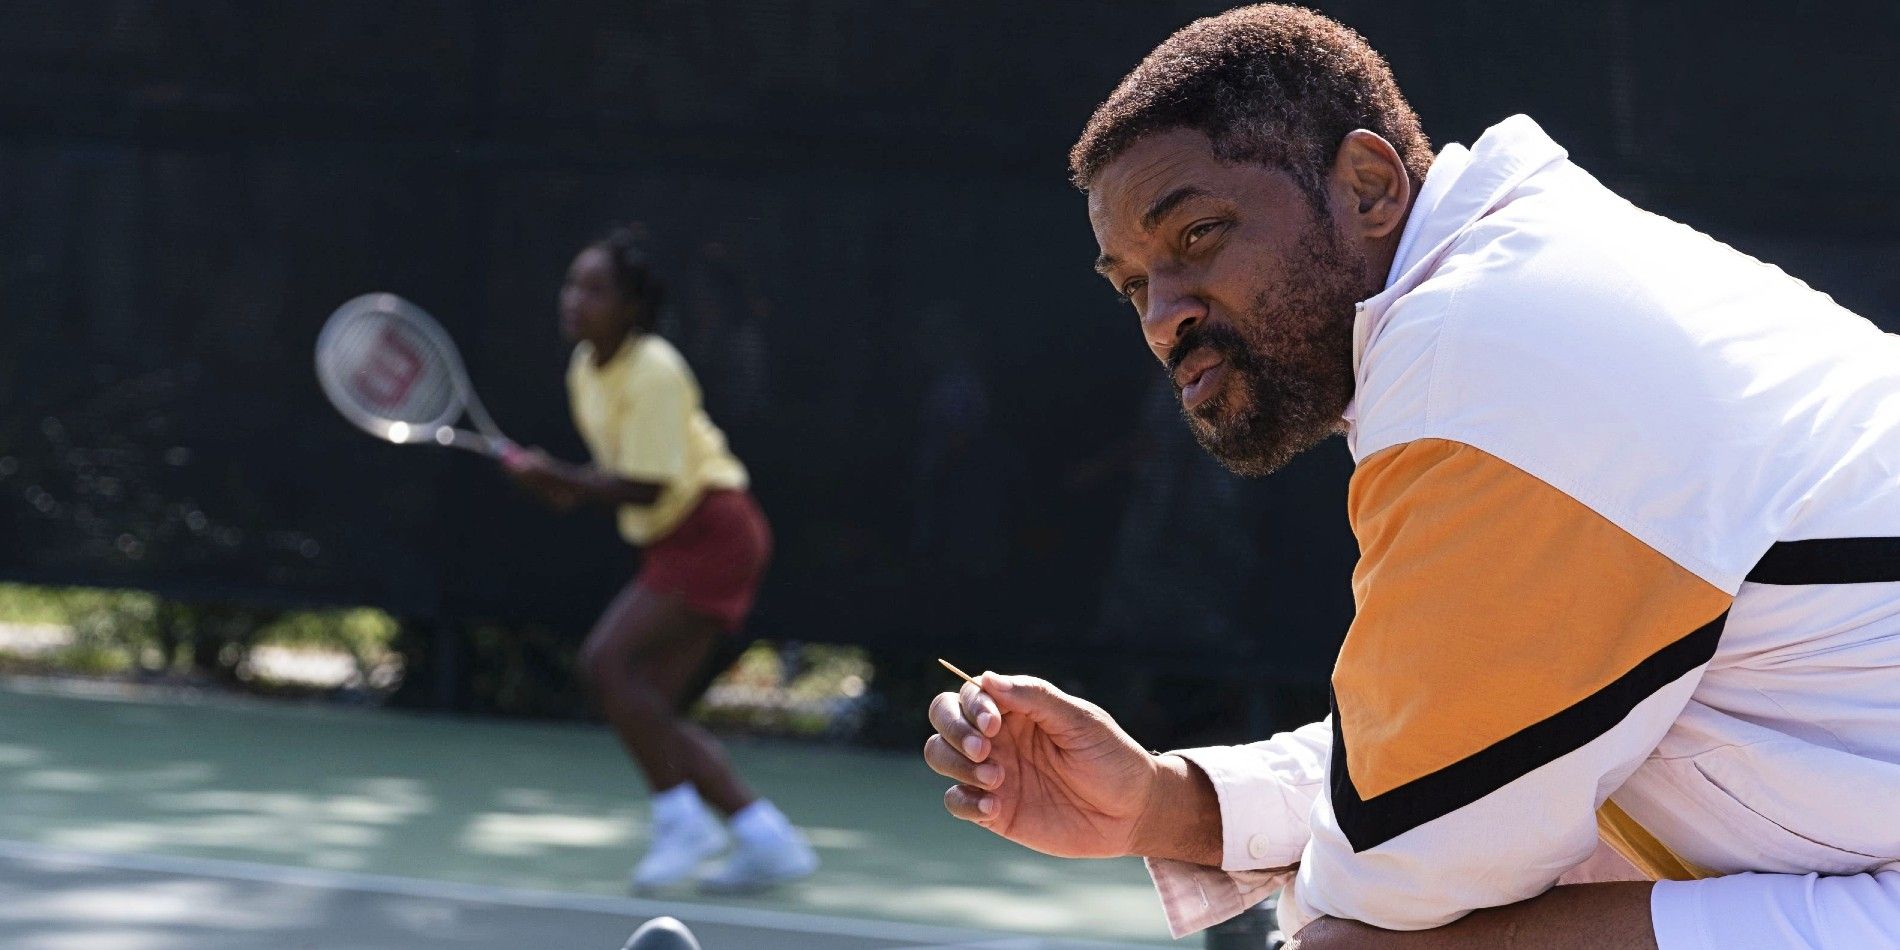 Will Smith as Richard Williams At the Compton Tennis Courts in King Richard